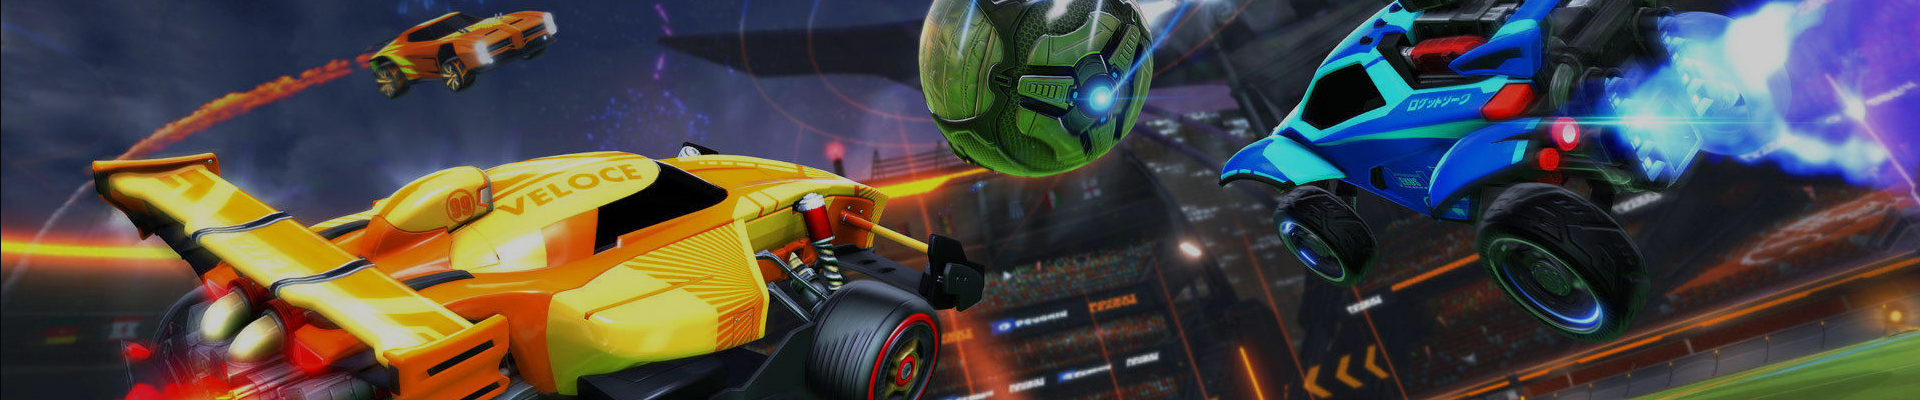 Improving Your Aim in Rocket League